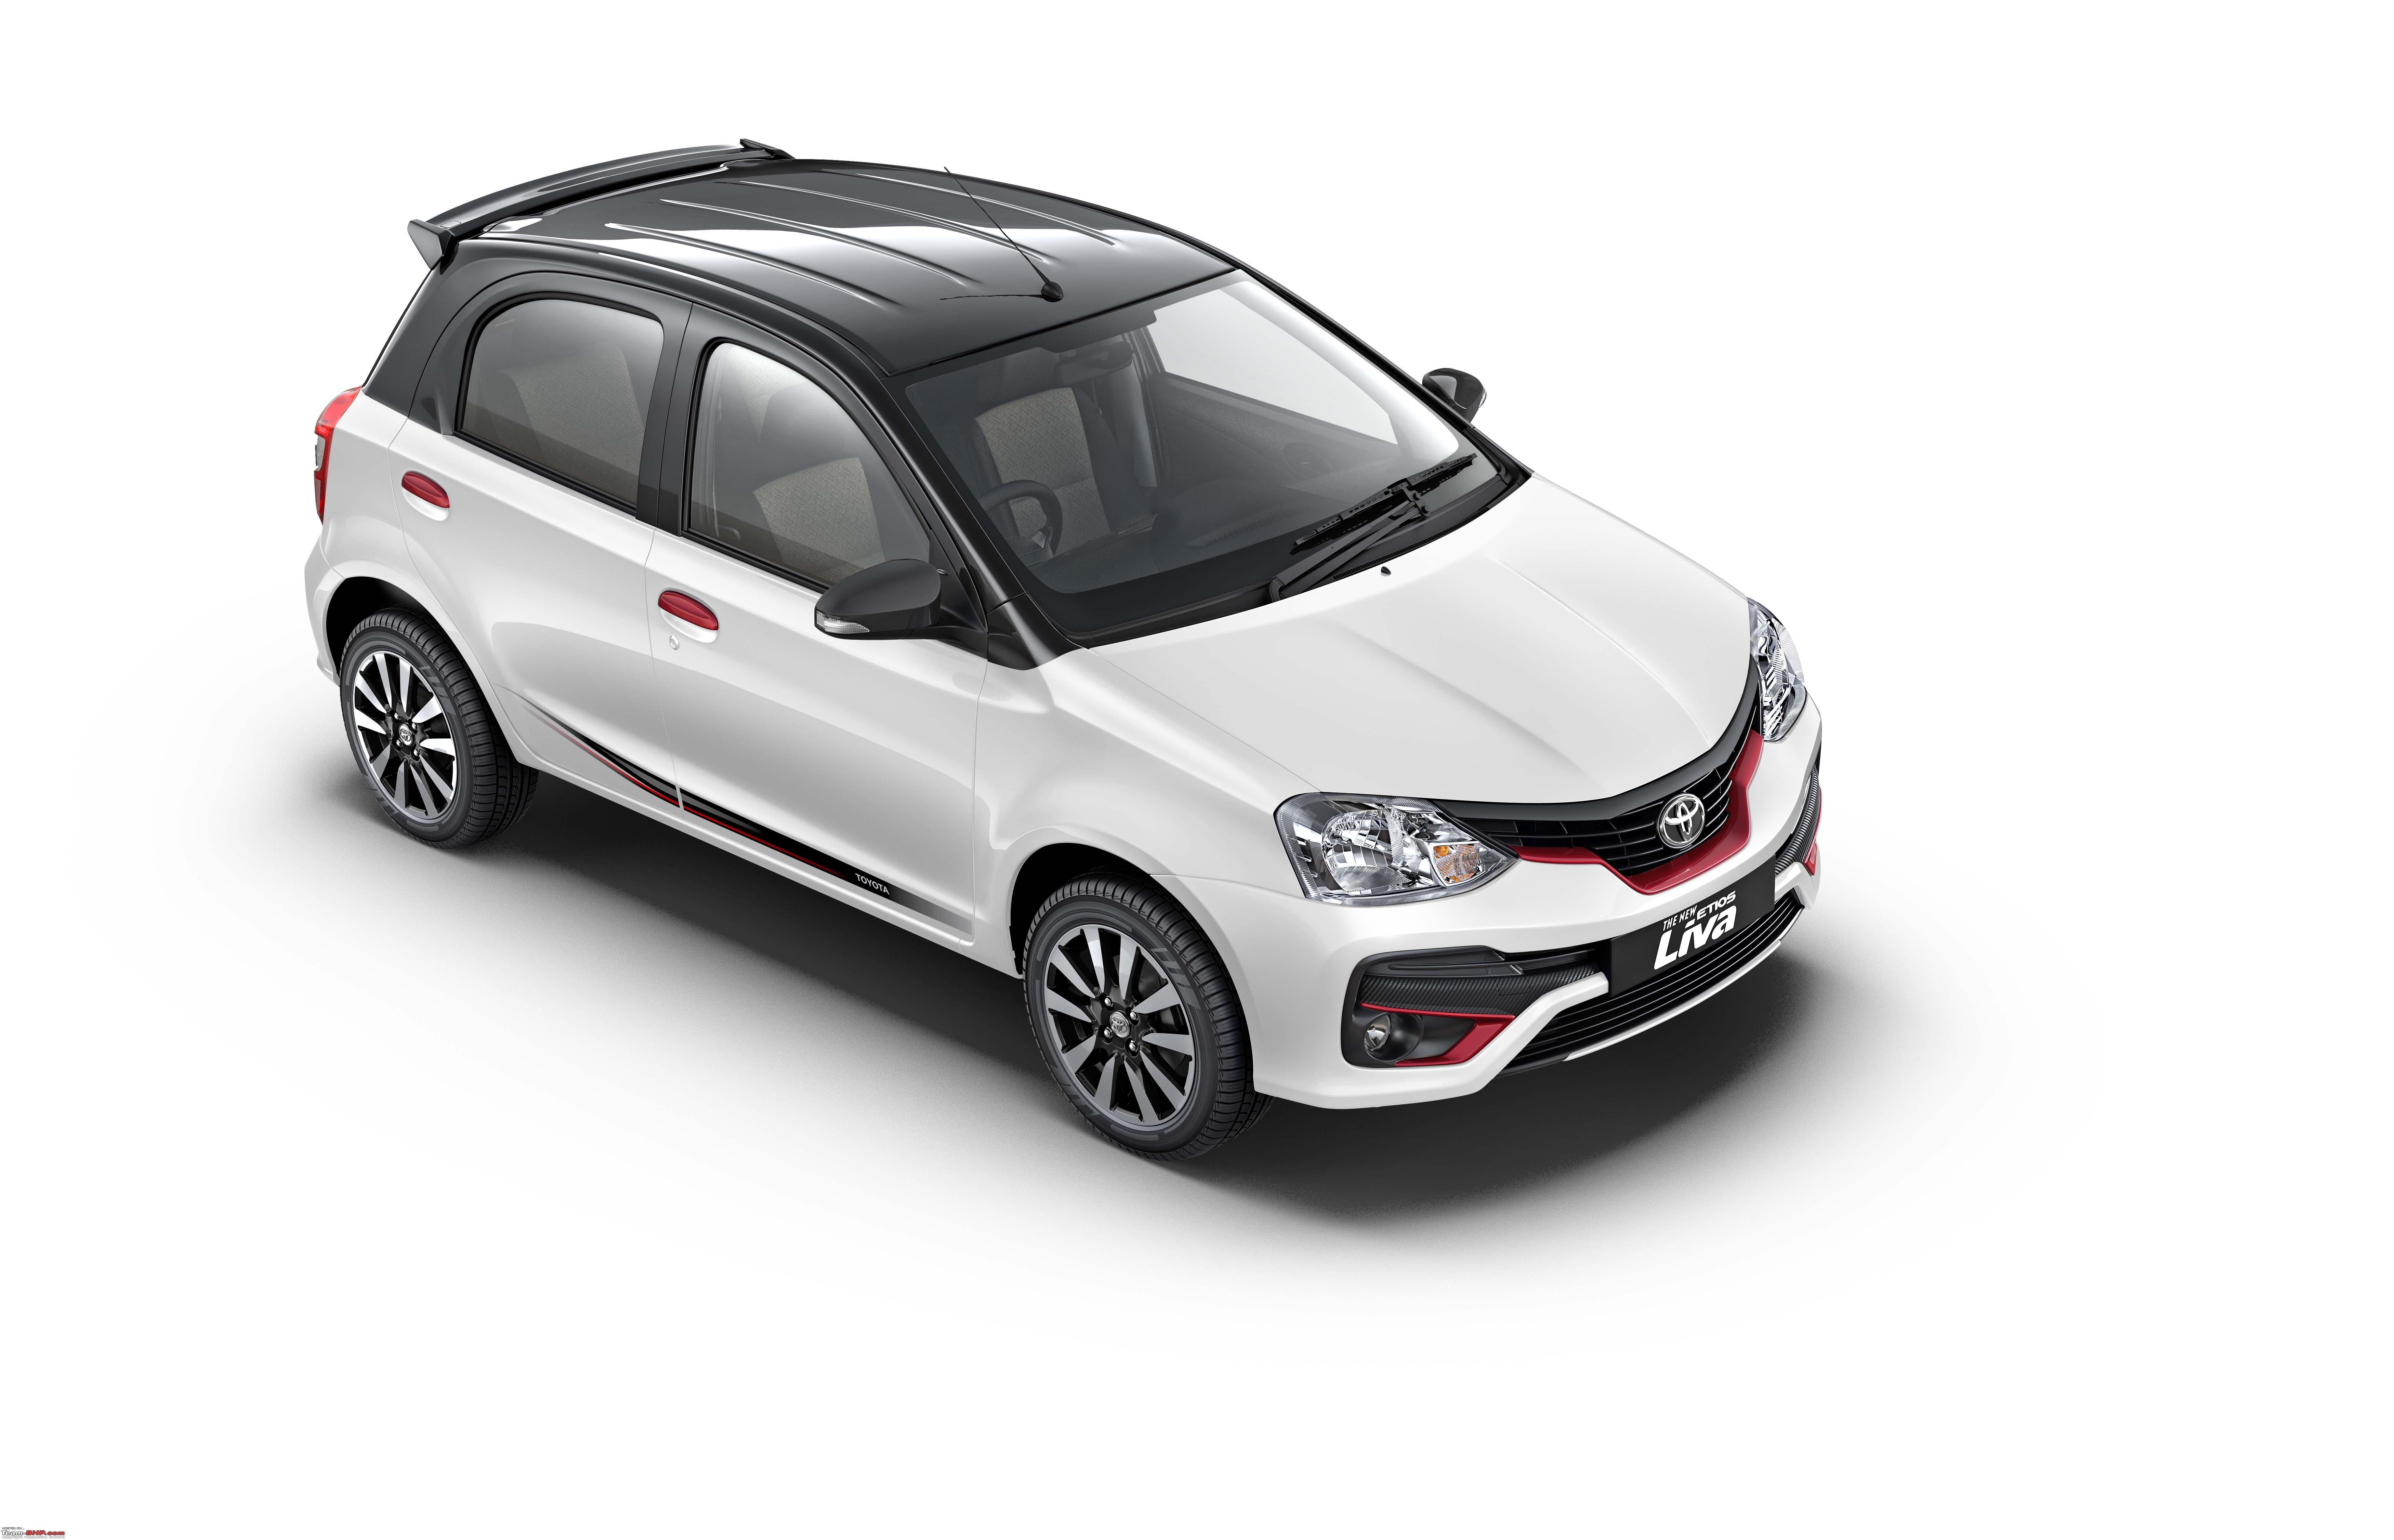  Toyota Etios Liva  Limited Edition launched at Rs 6 51 